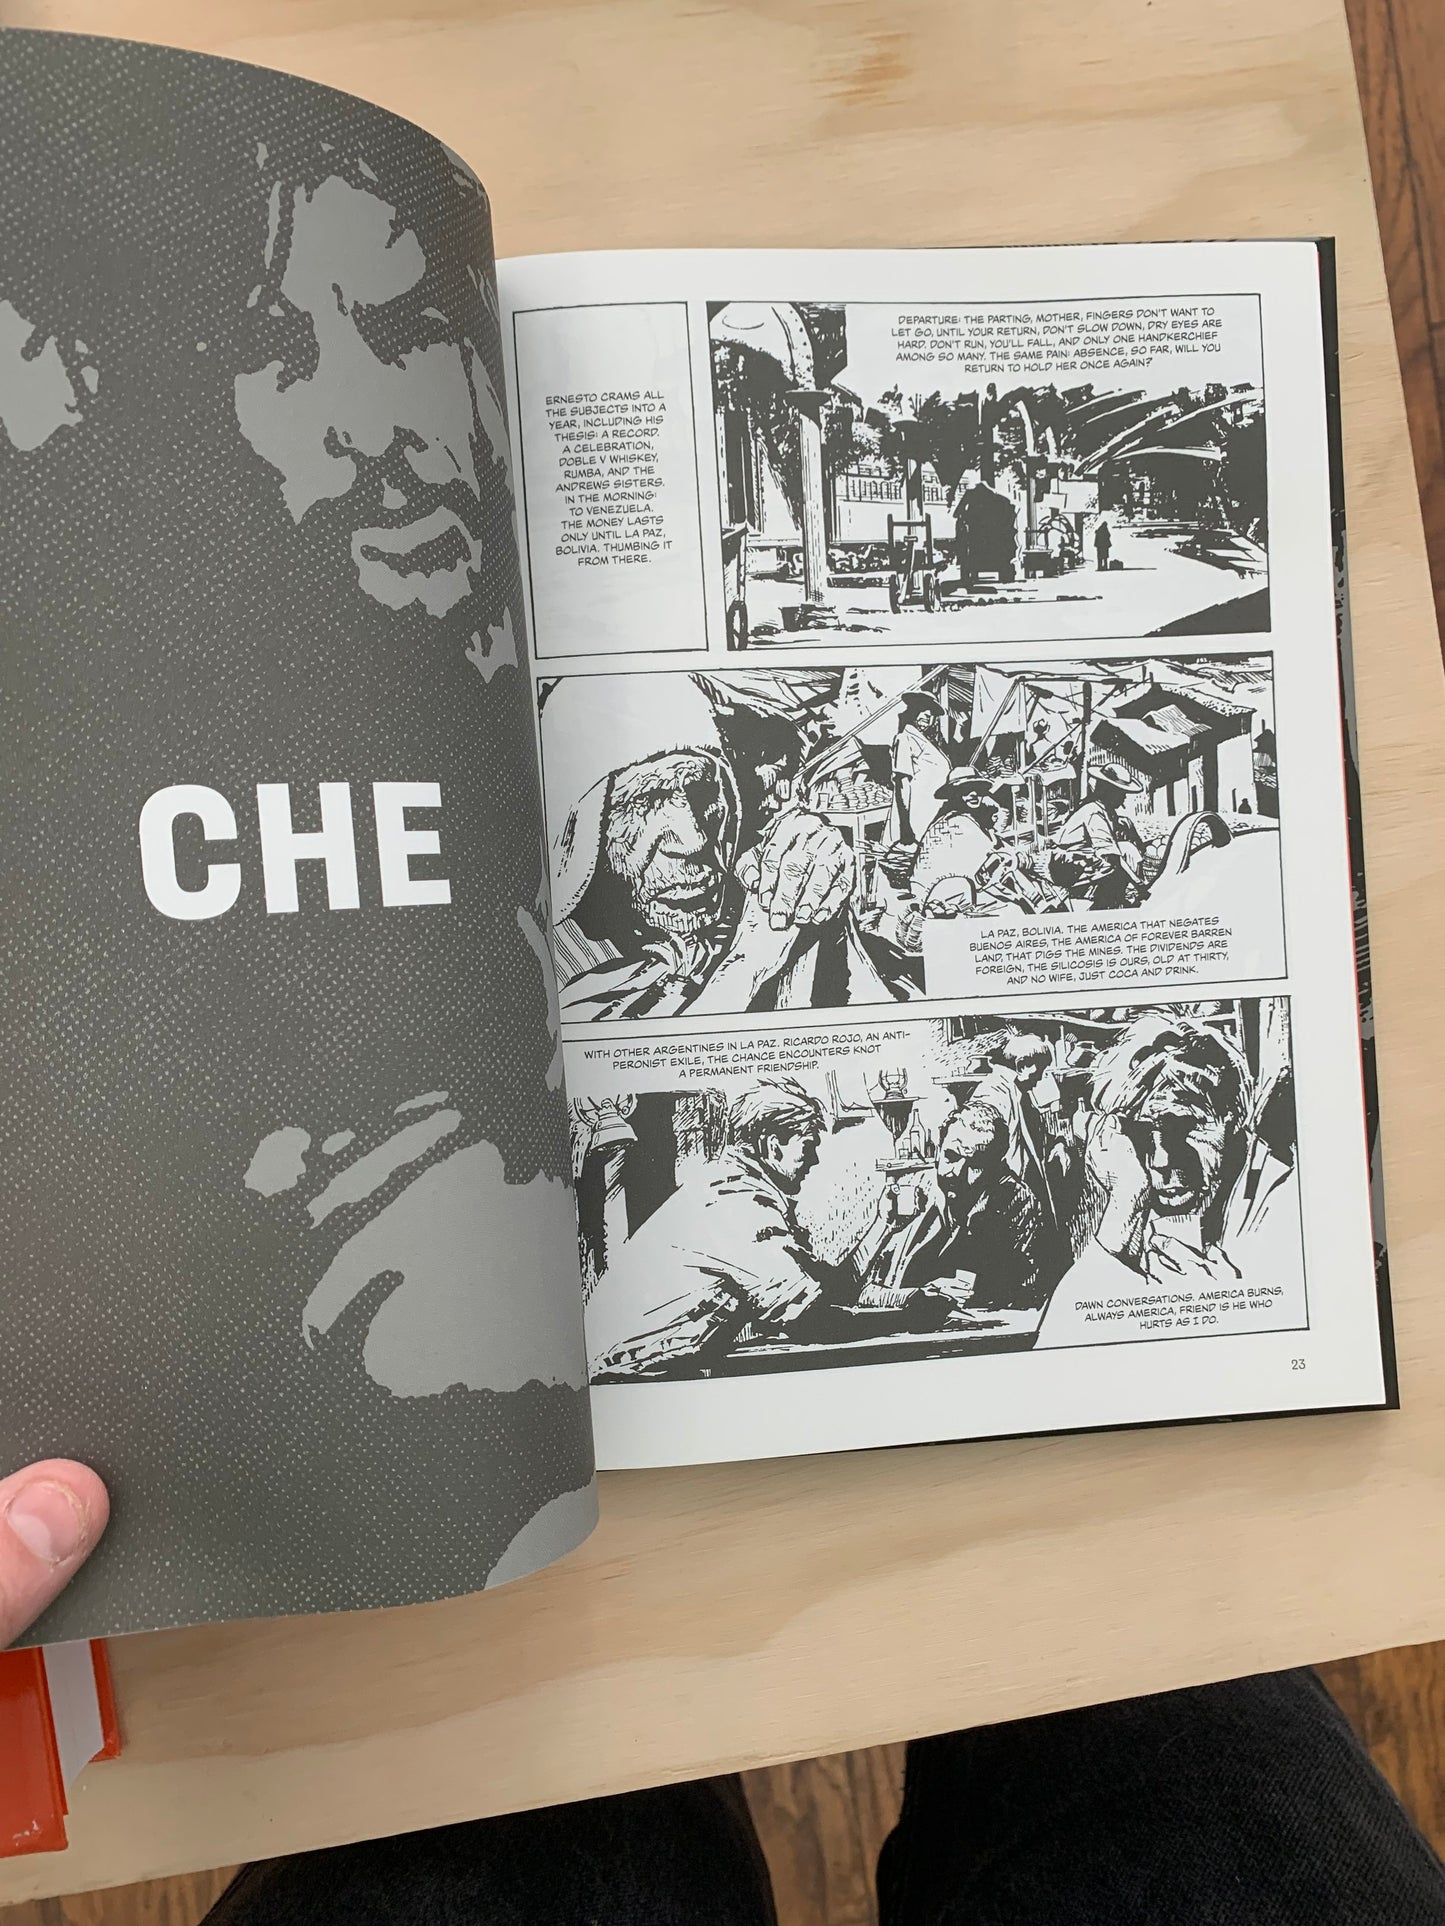 The Life of Che: An Impressionistic Biography